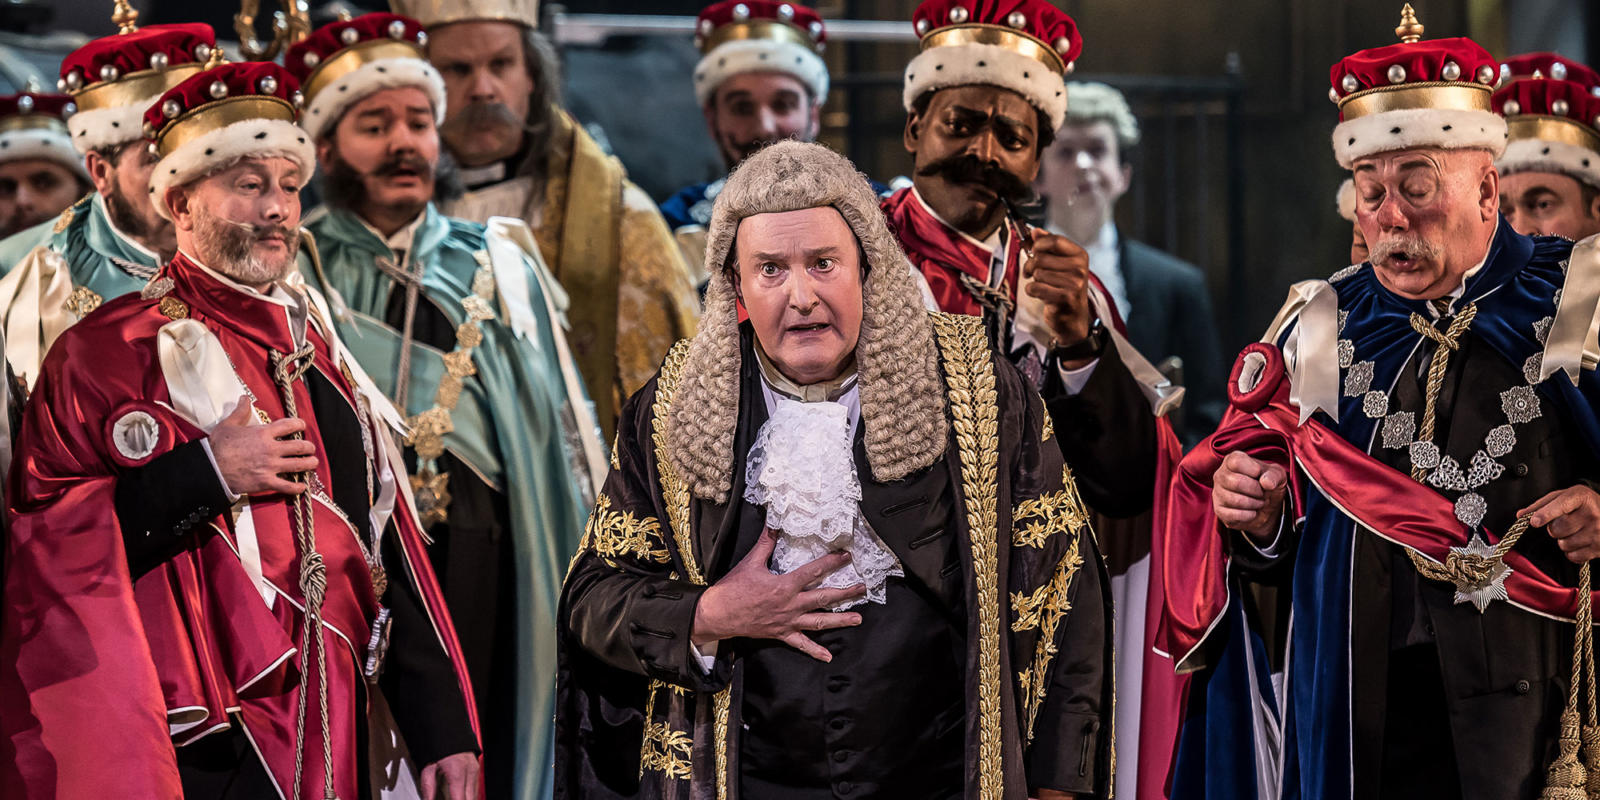 The Lord Chancellor in Iolanthe surrounded by chorus members